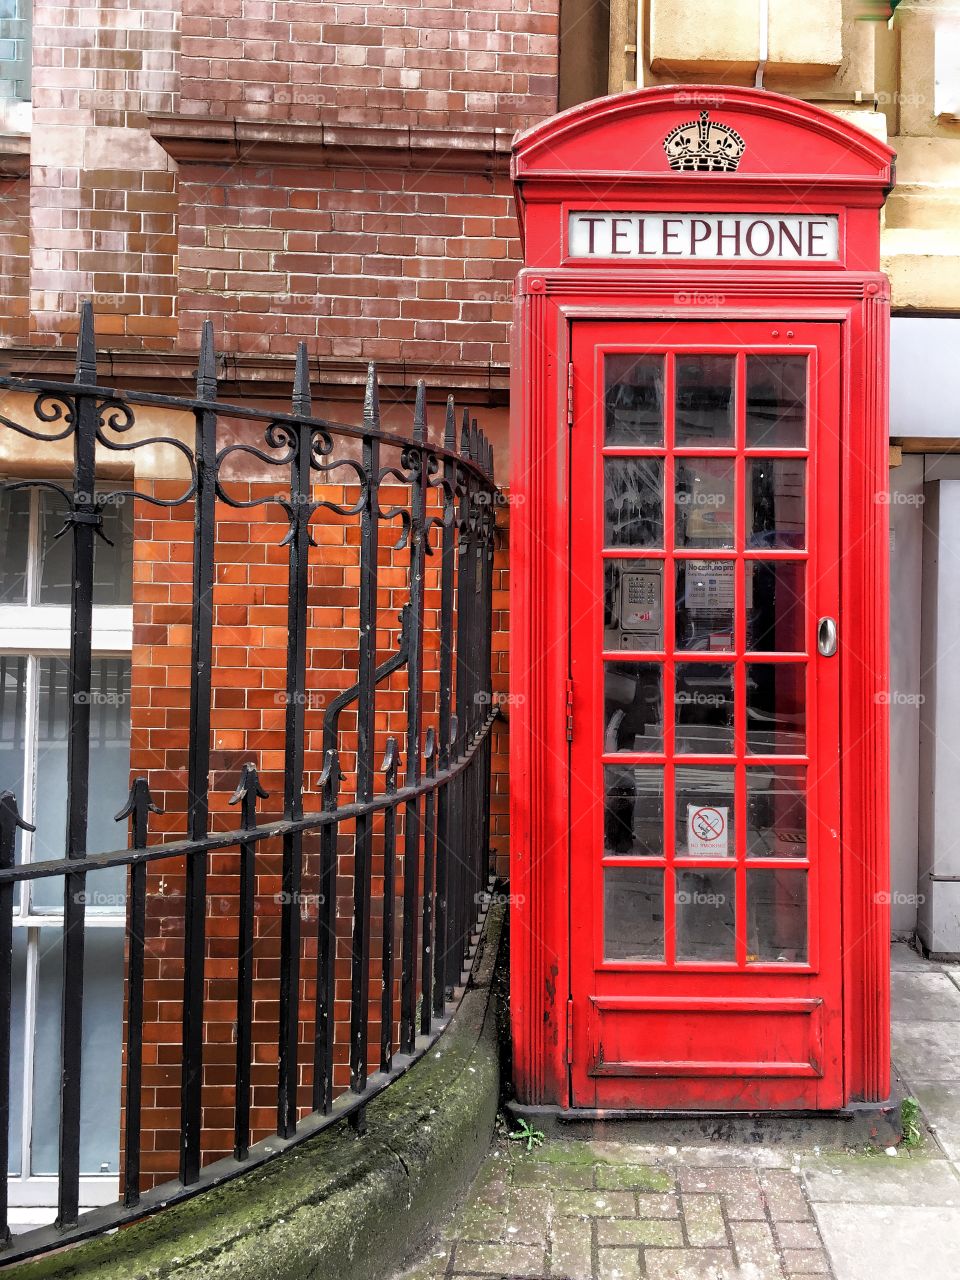 Typical British phone booth